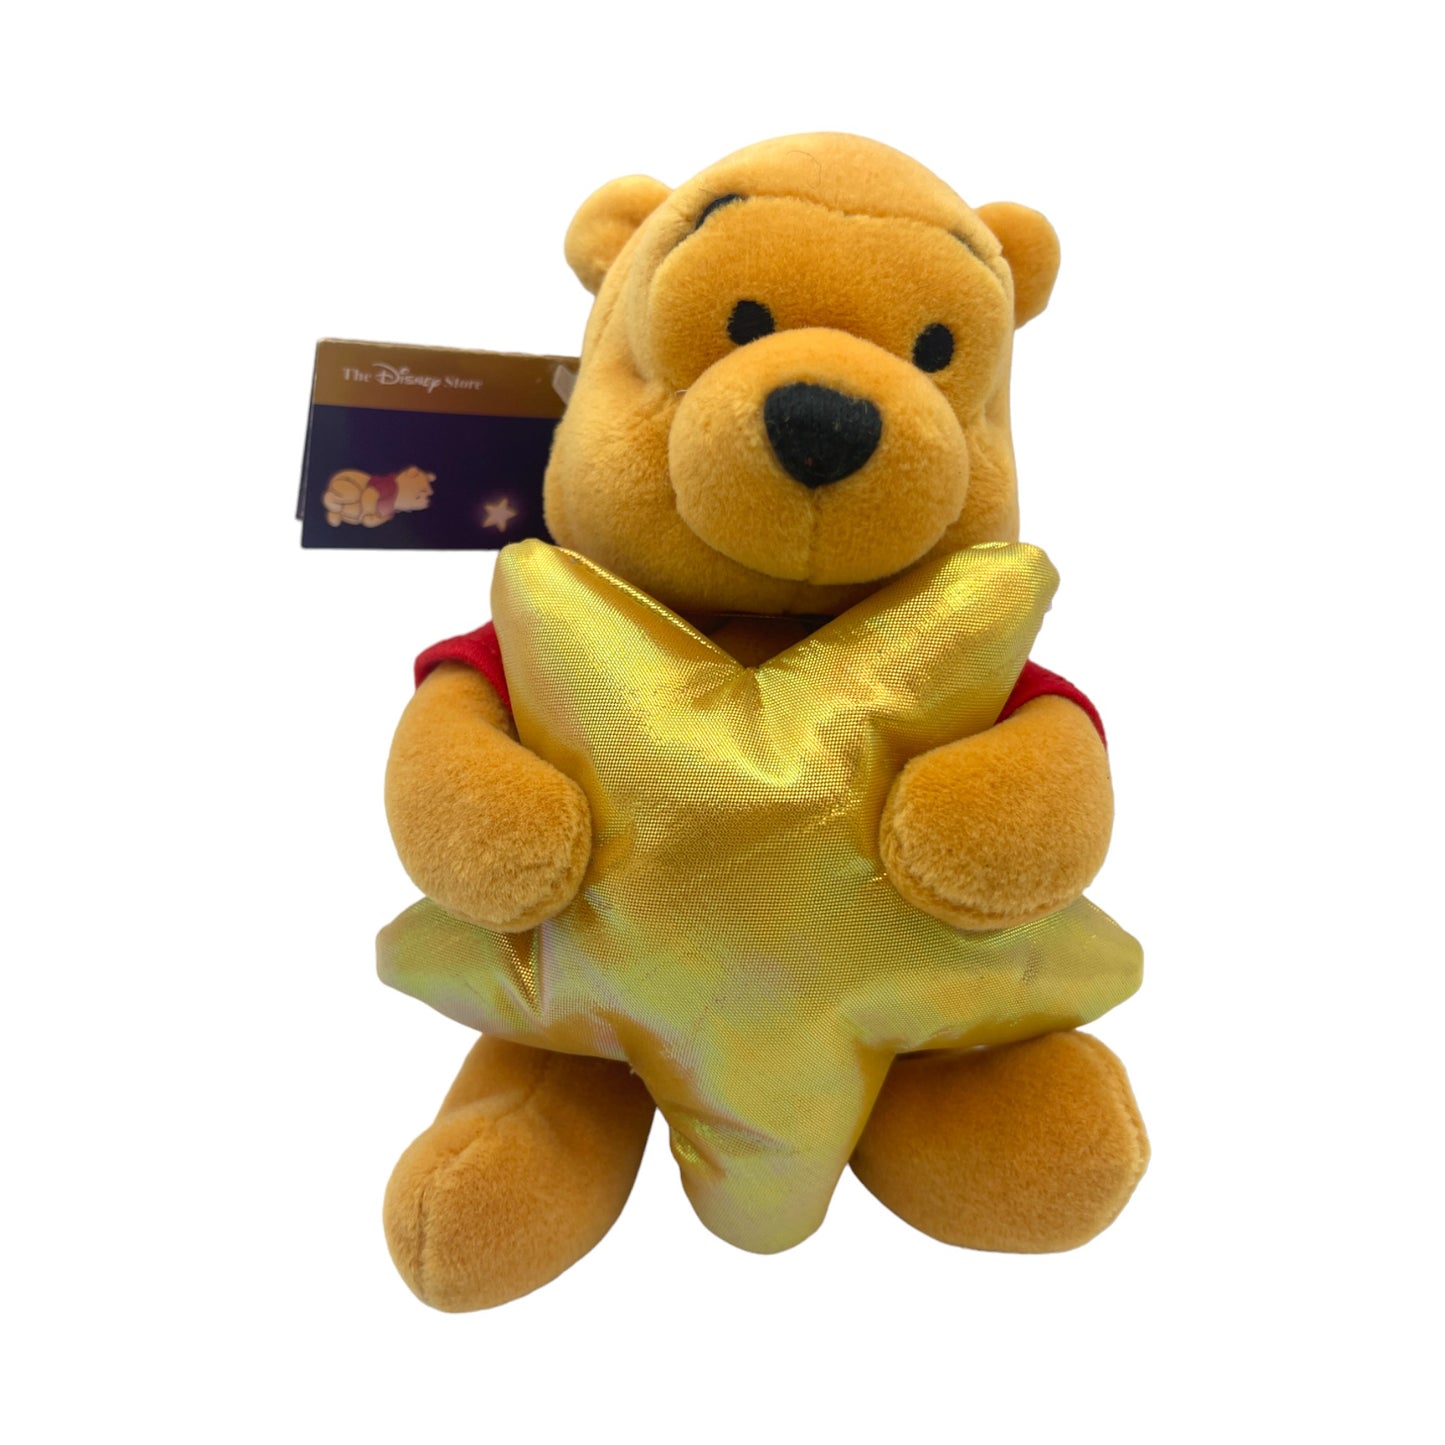 Disney Store London - Wishes Pooh - With Tag - Vintage - 8"